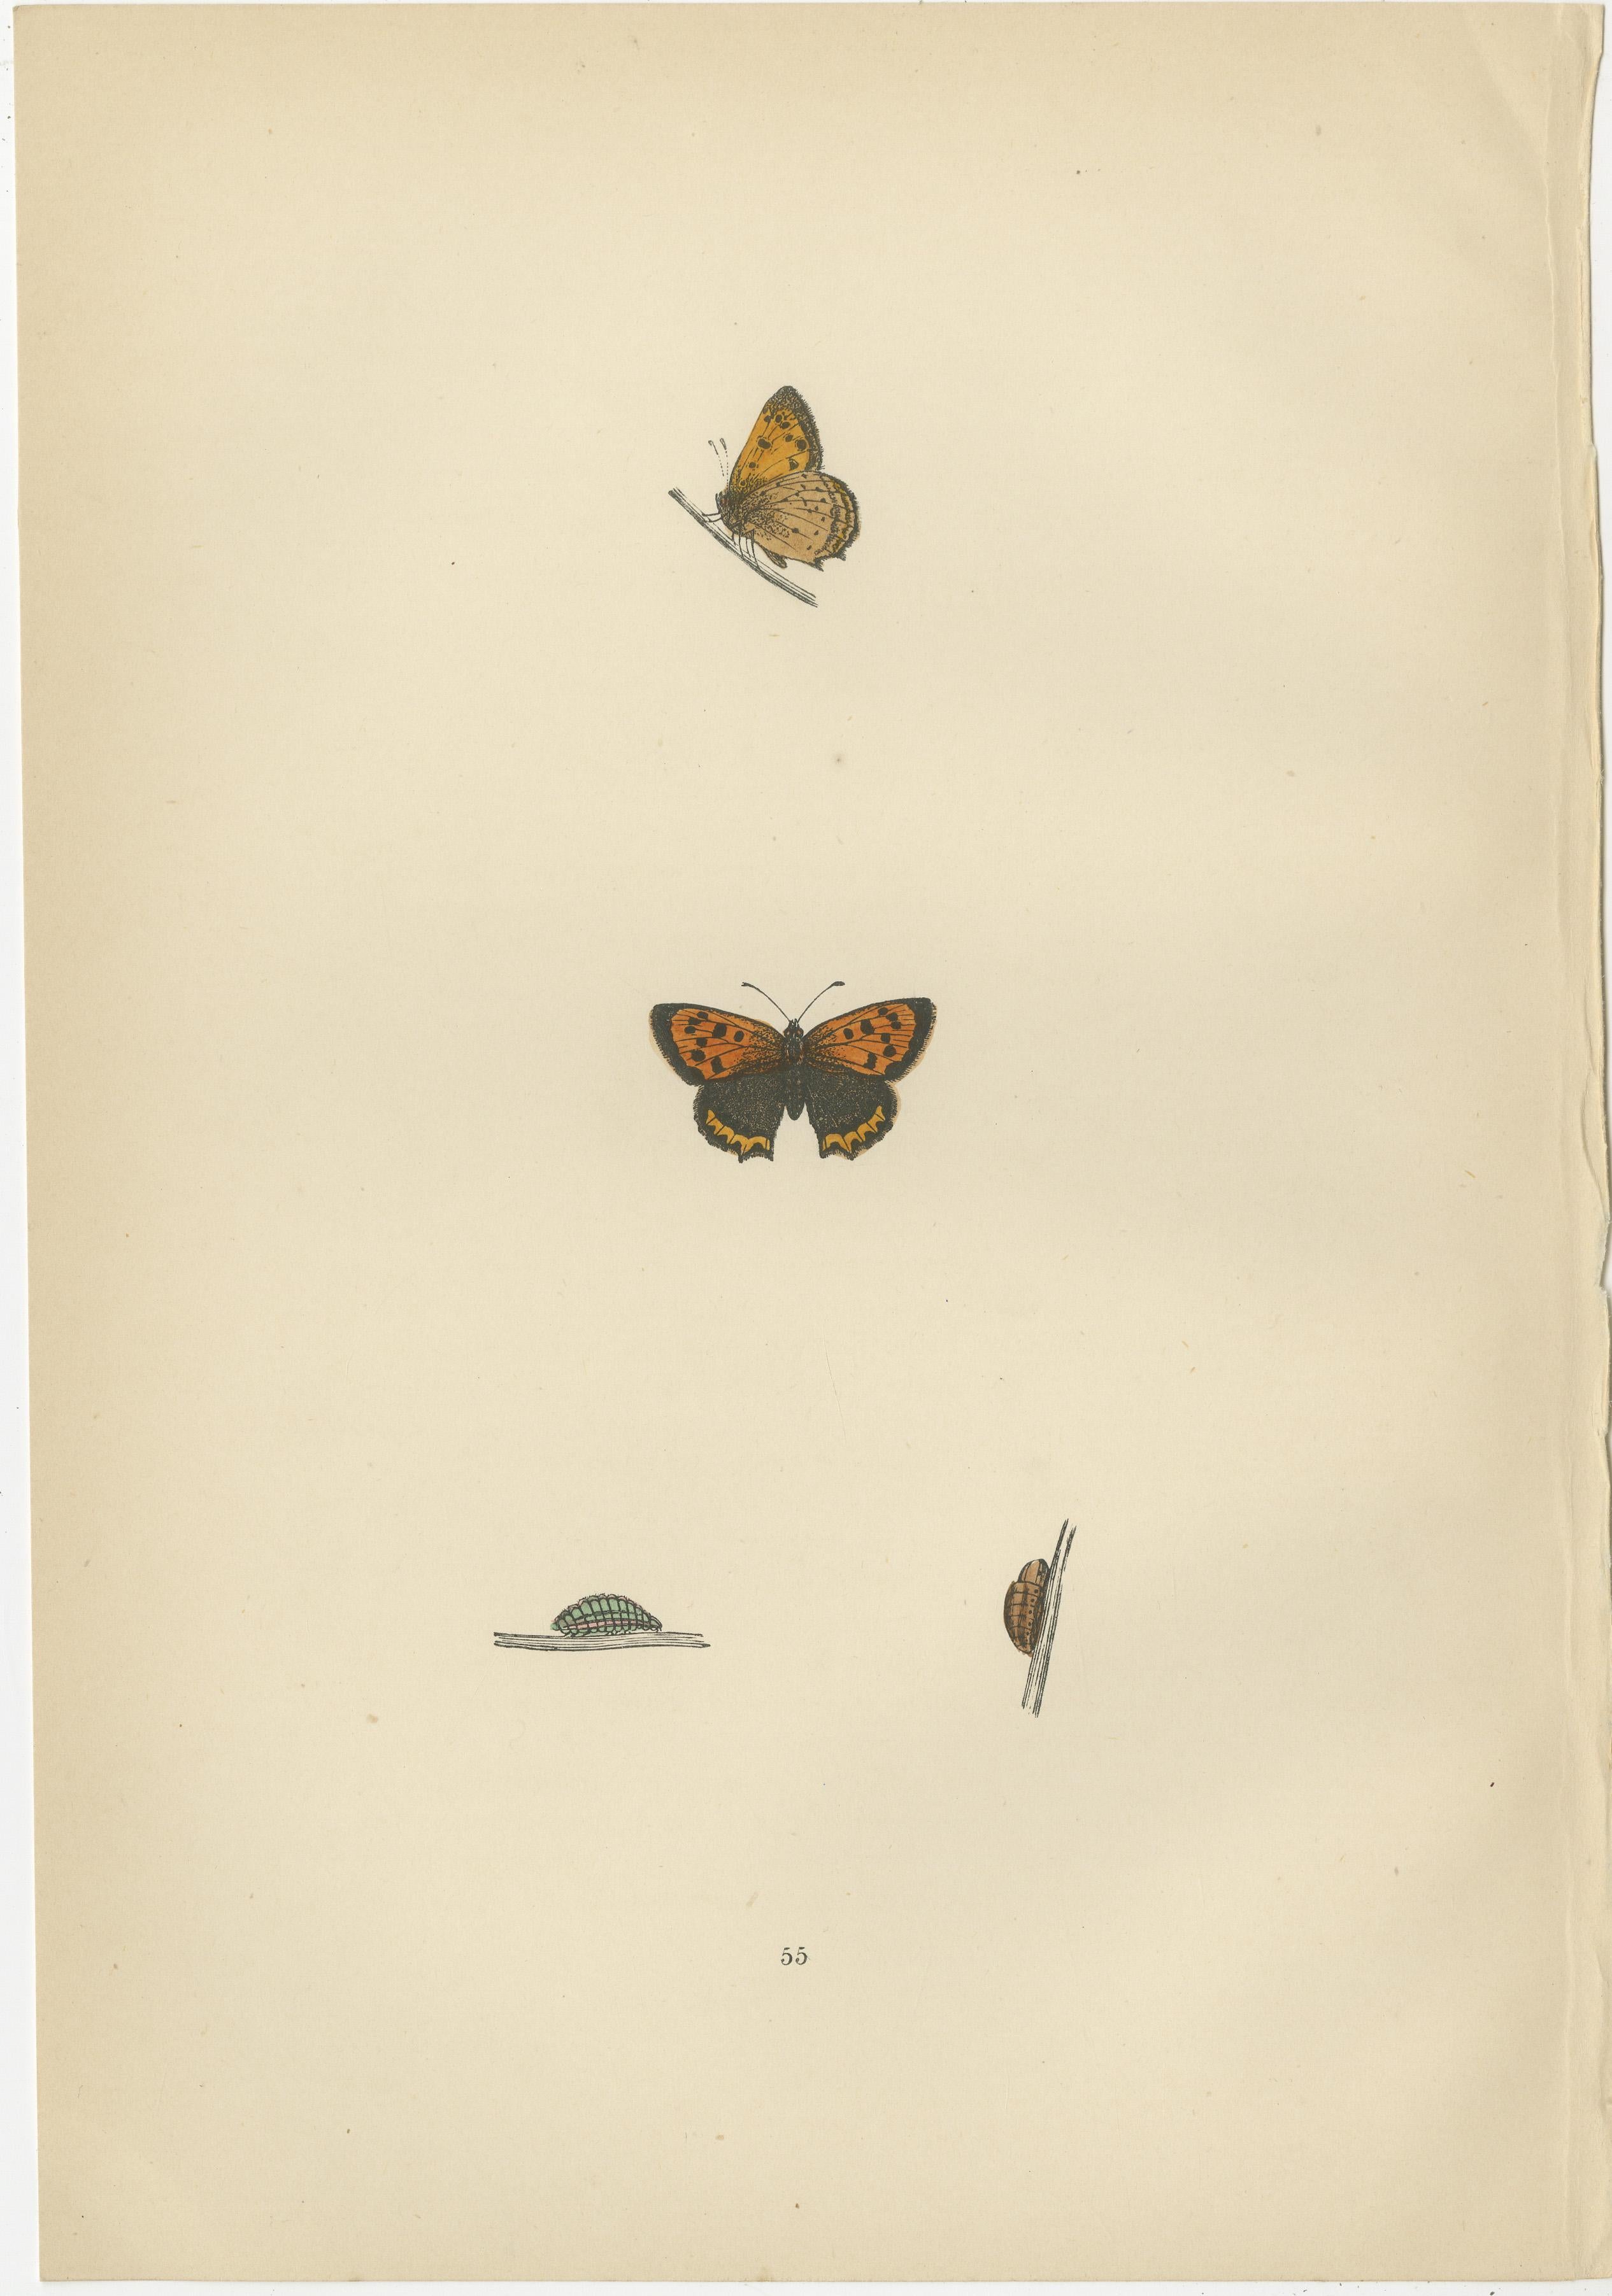 Beautiful hand-colored antique prints of butterflies. They are from a work by Morris, published in 1890.

The butterflies from these plates are known for their distinct appearances and behaviors:

1. **Small Copper (Lycaena phlaeas)**: The Small